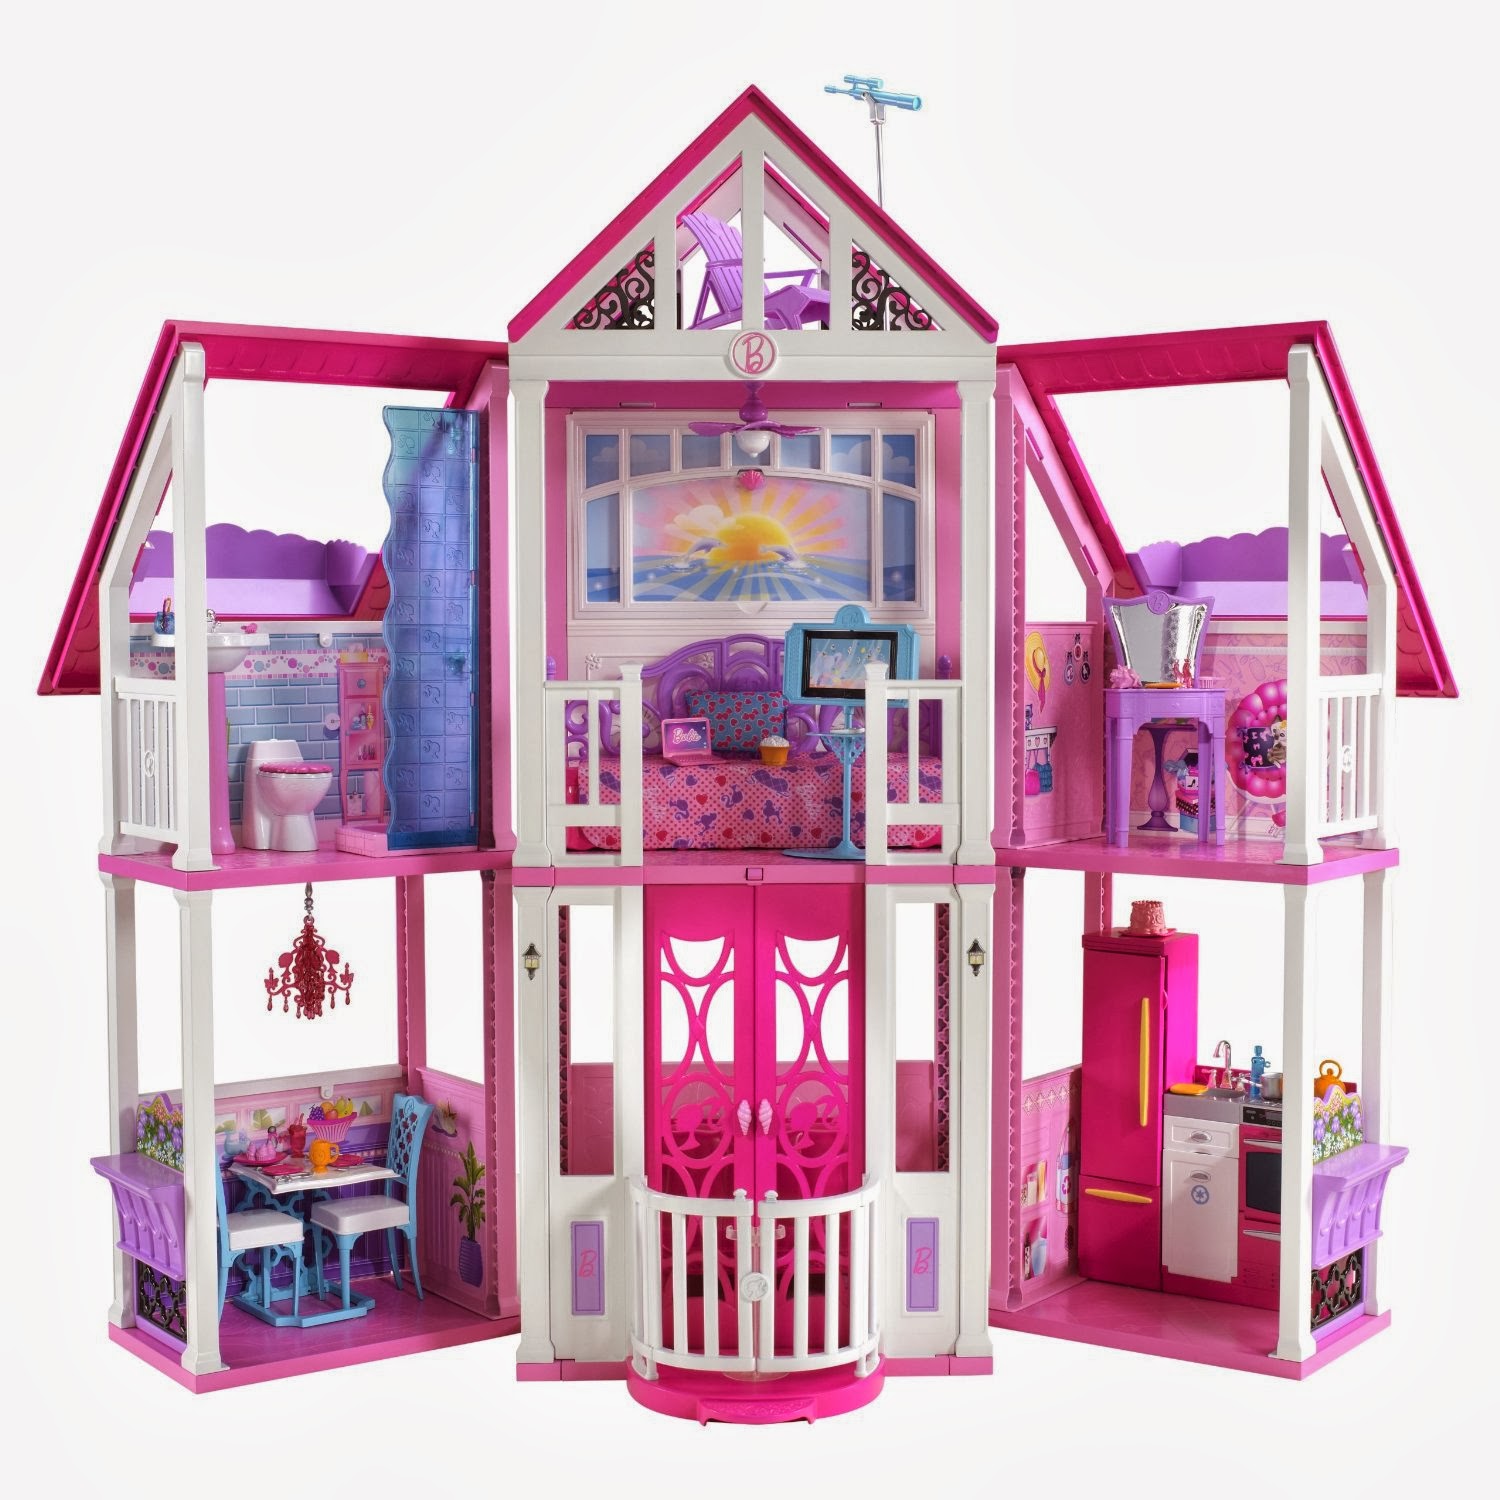 Barbie Dream House Pictures   Widescreen HD Wallpapers 1500x1500